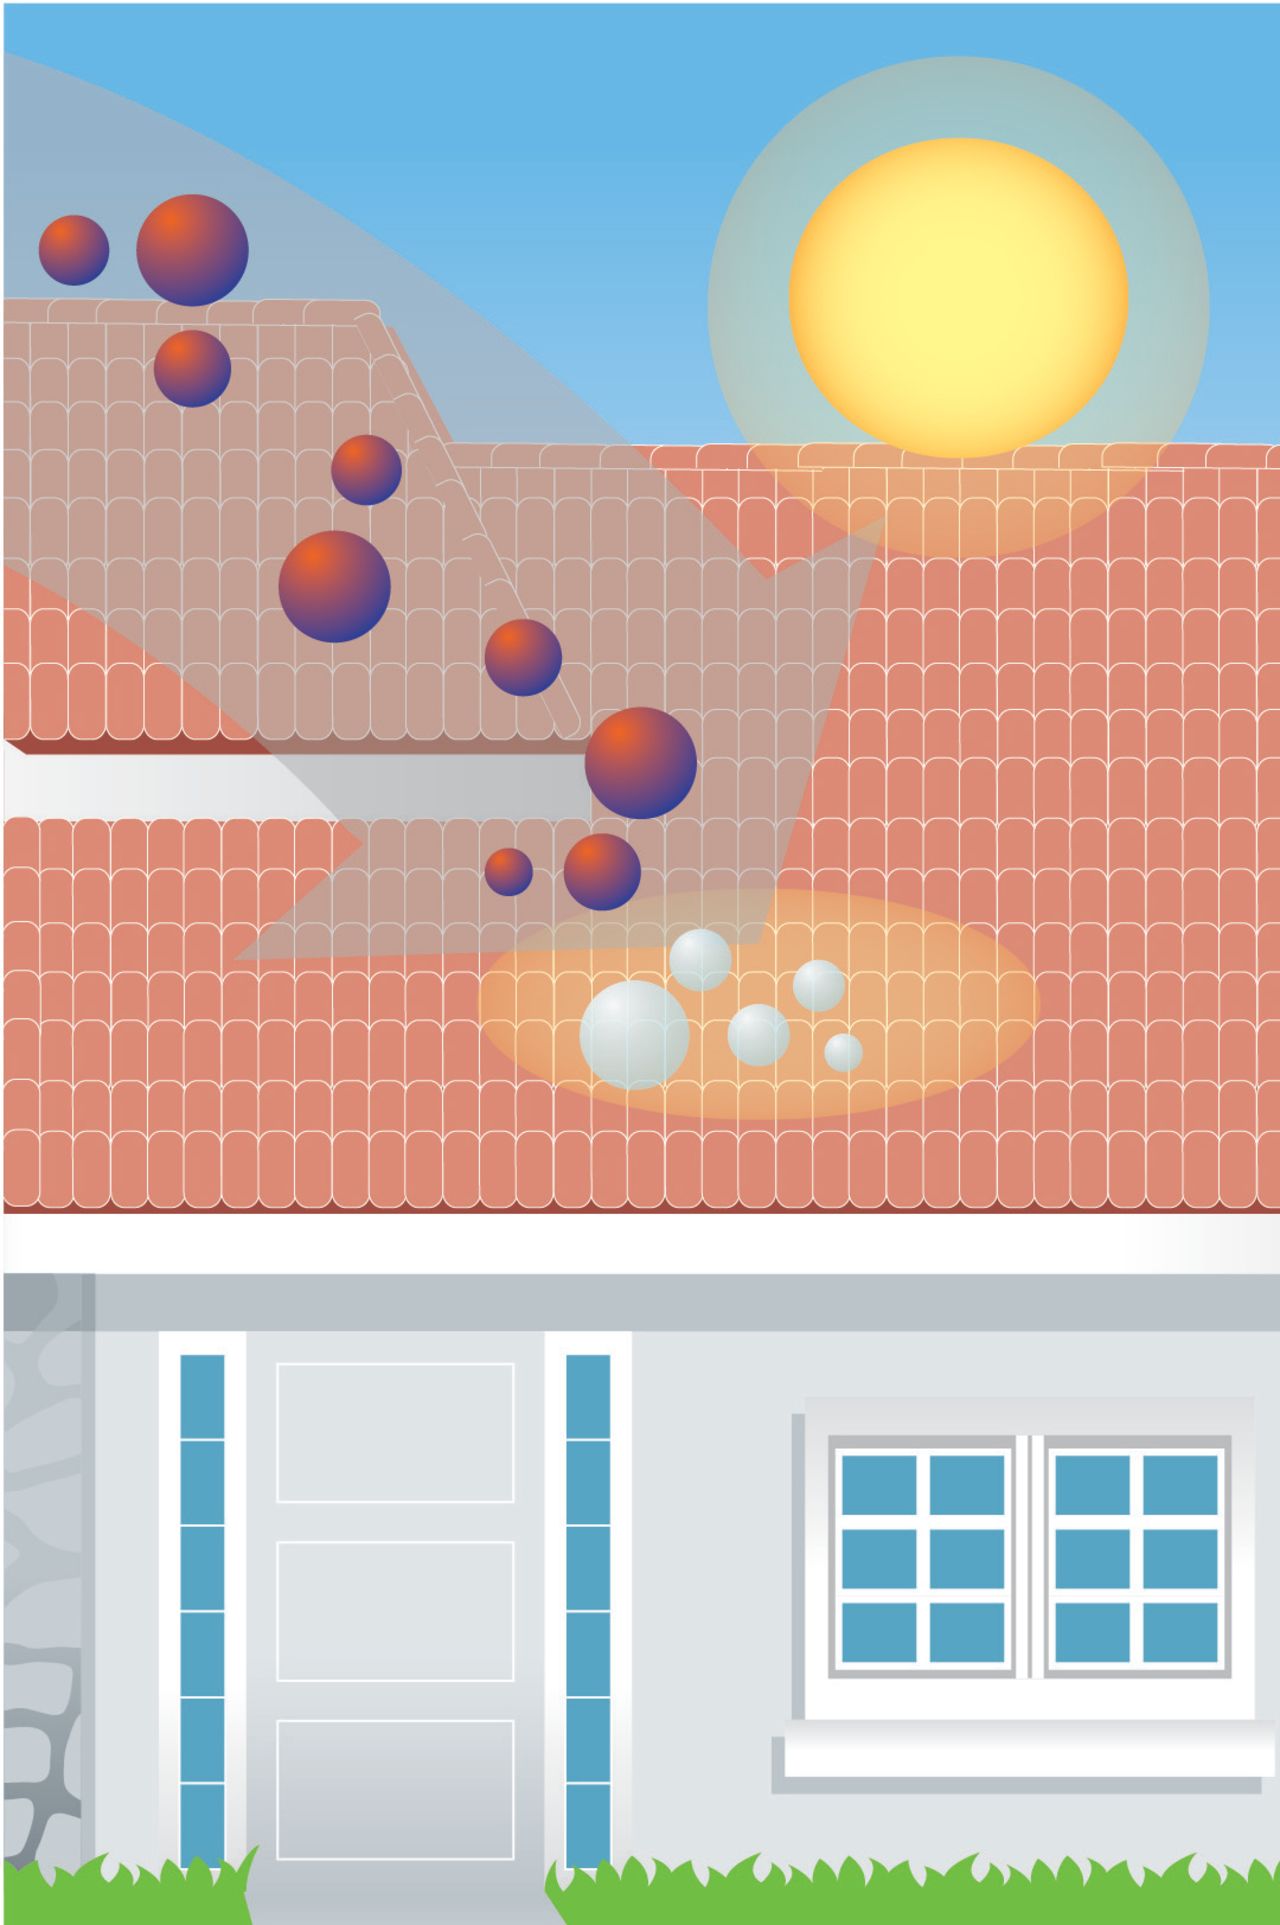 The tiles are coated with titanium dioxide, a photocatalyst, activated by daylight, which reacts with nitrogen oxides in the air turning them into harmless calcium nitrates, as this cartoon shows.